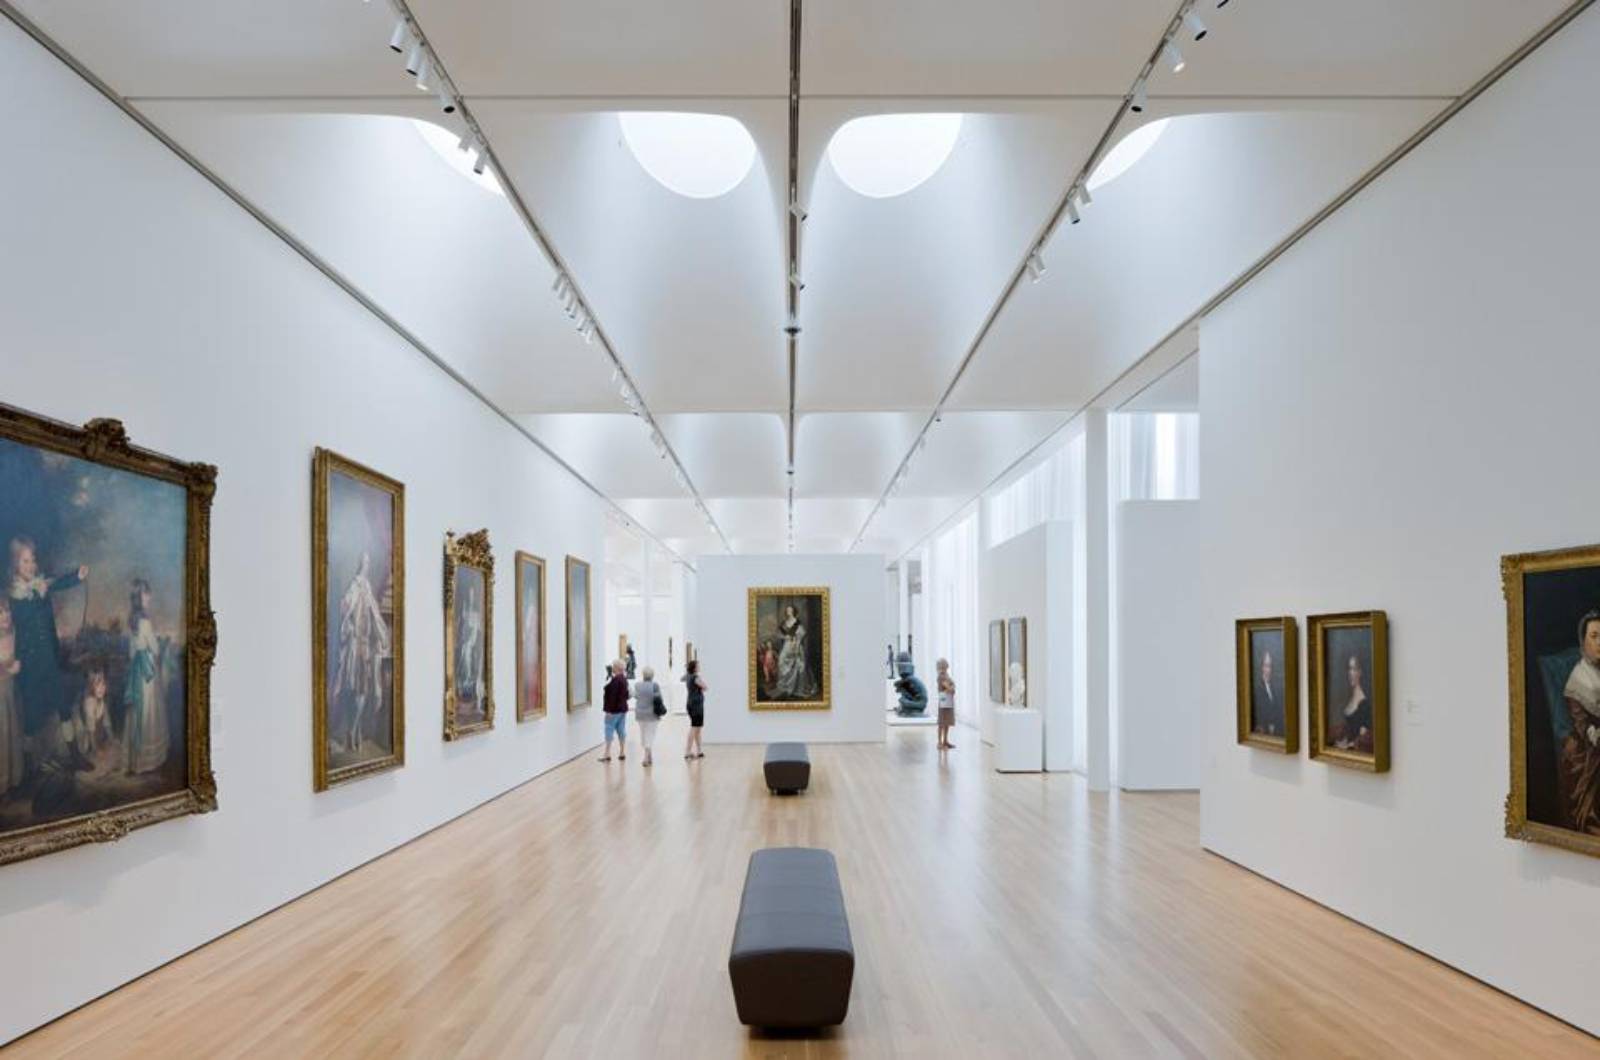 NORTH CAROLINA MUSEUM OF ART BY THOMAS PHIFER AND PARTNERS | A As Architecture